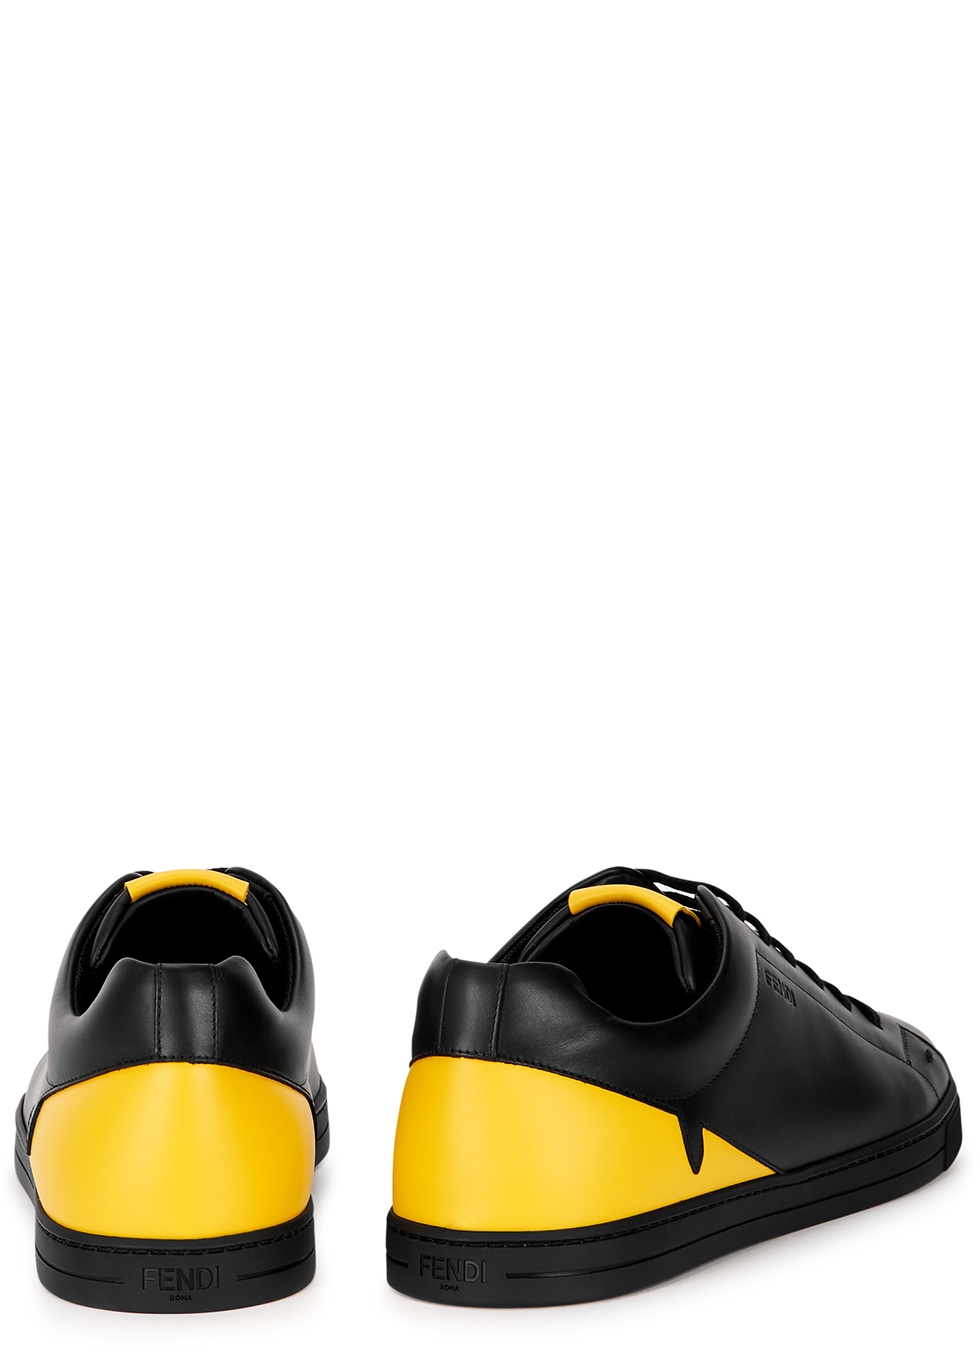 Fendi Black and yellow leather sneakers 